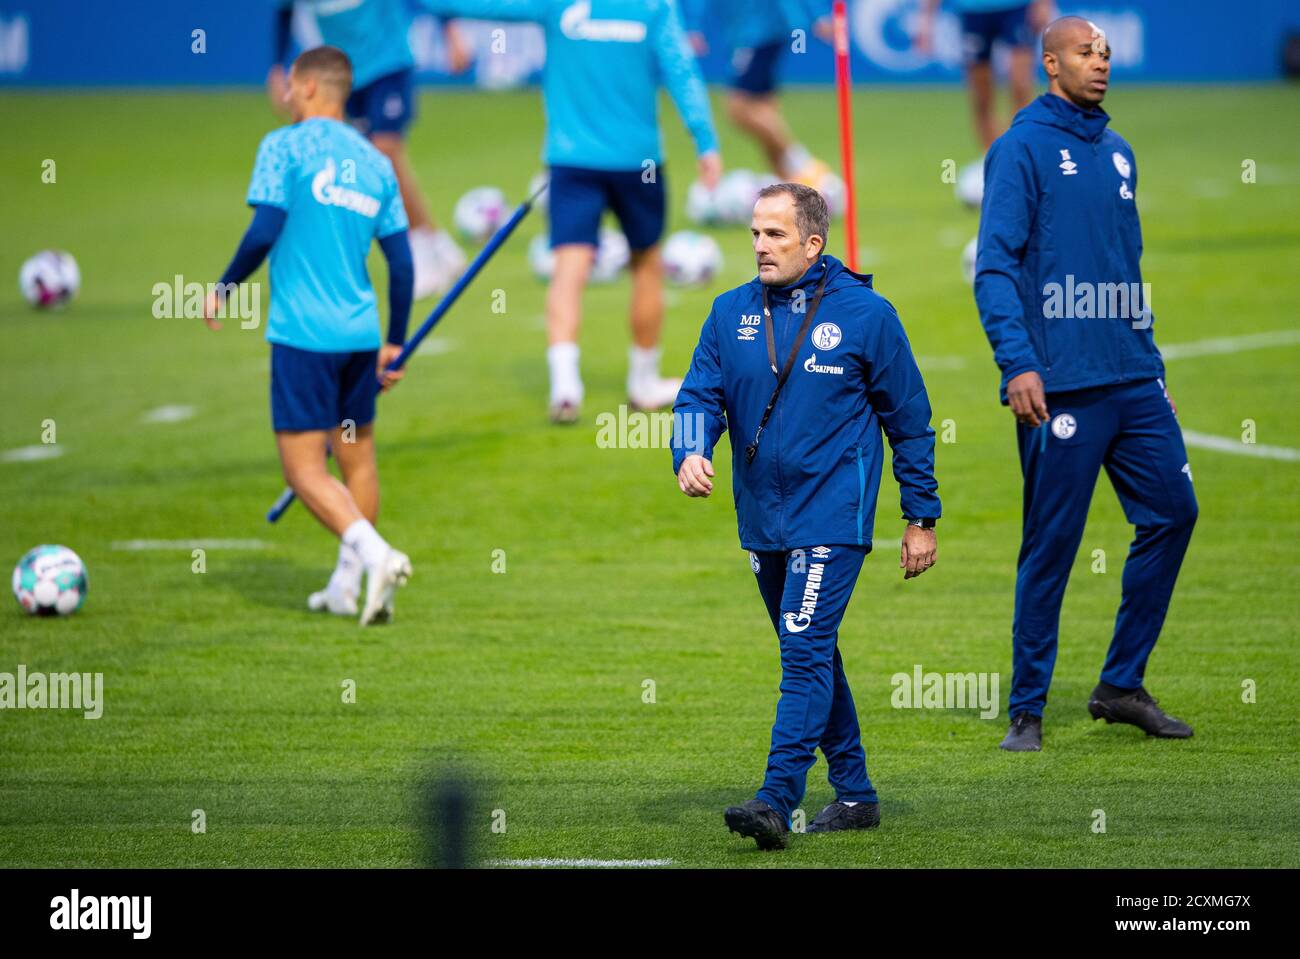 30 September 2020, North Rhine-Westphalia, Gelsenkirchen: Football; Bundesliga; training of FC Schalke 04. Schalke's coach Manuel Baum (l) and Schalke's member of the coaching staff Naldo are walking across the field during training. FC Schalke 04, a Bundesliga soccer team that has been in financial and sporting difficulties, has found a successor for Wagner in the former Augsburg coach Baum. The 41-year-old receives a contract until June 30, 2022 and is to lead the traditional club out of its deep crisis. Schalke made the announcement on Wednesday. 'With Baum, we have been able to win an abso Stock Photo